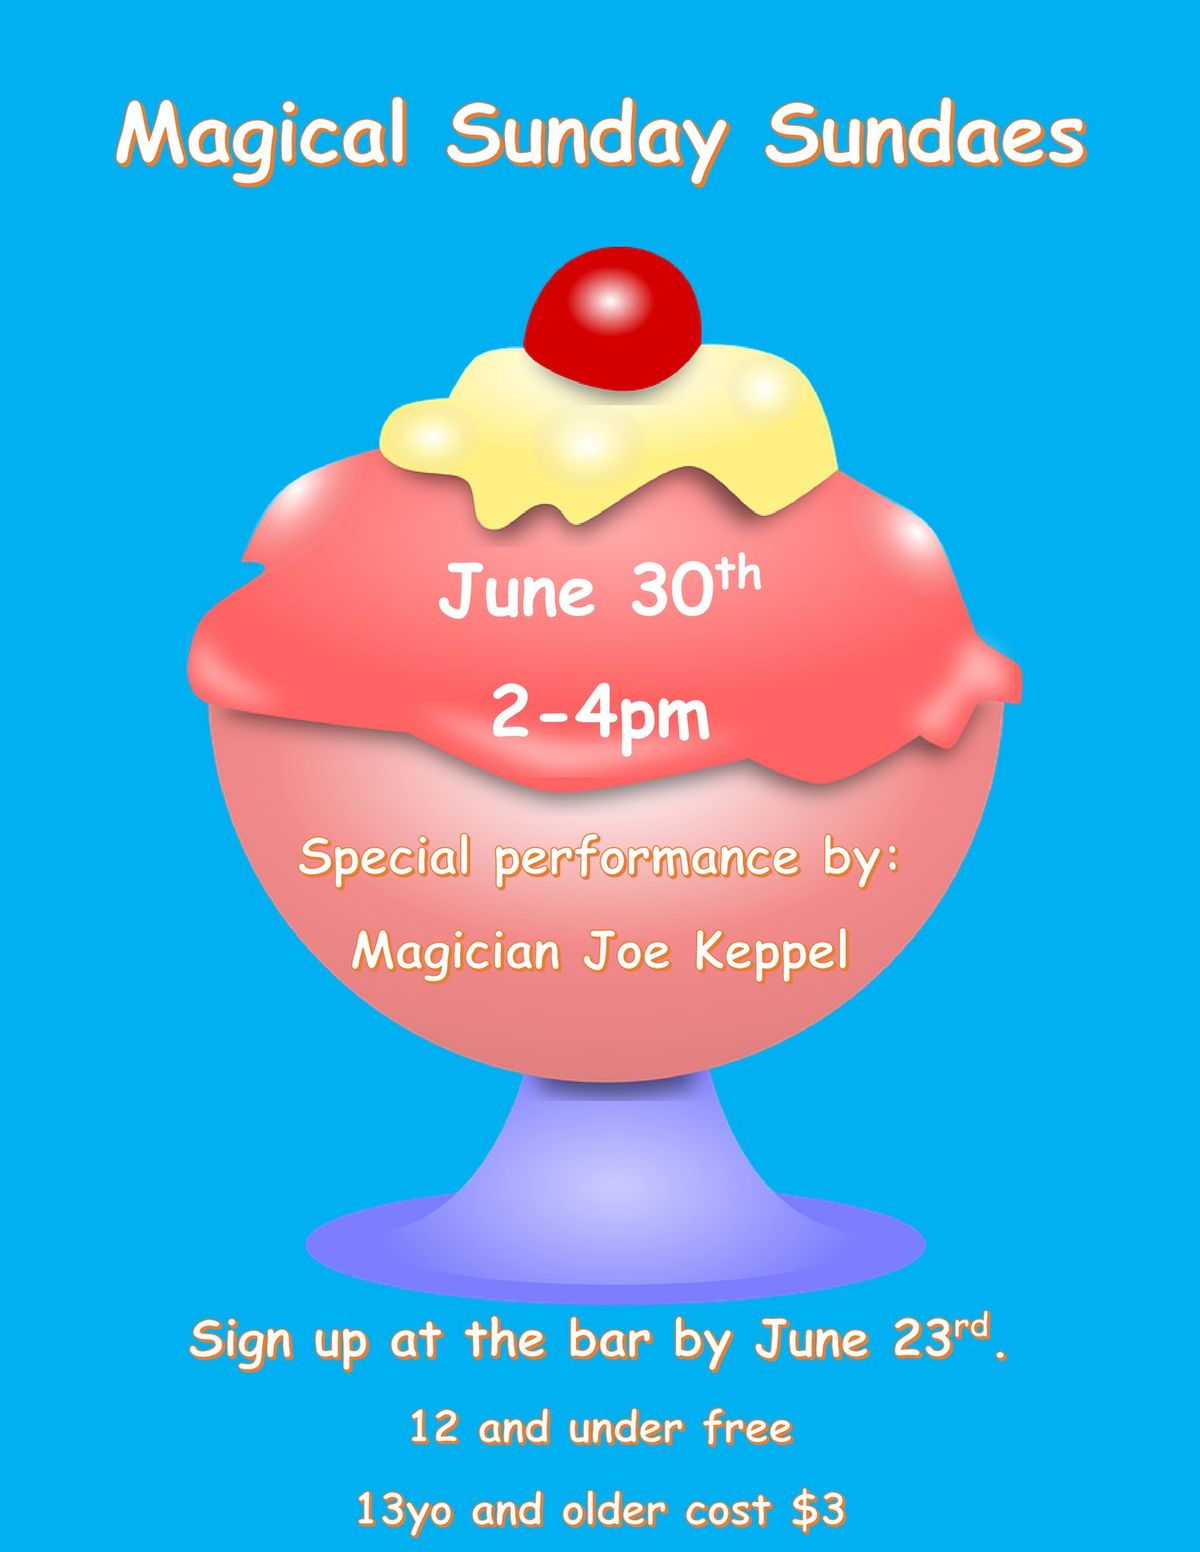 Magical Sunday Sundaes with Magician Joe Keppel (Members Only - Sign up in Bar)